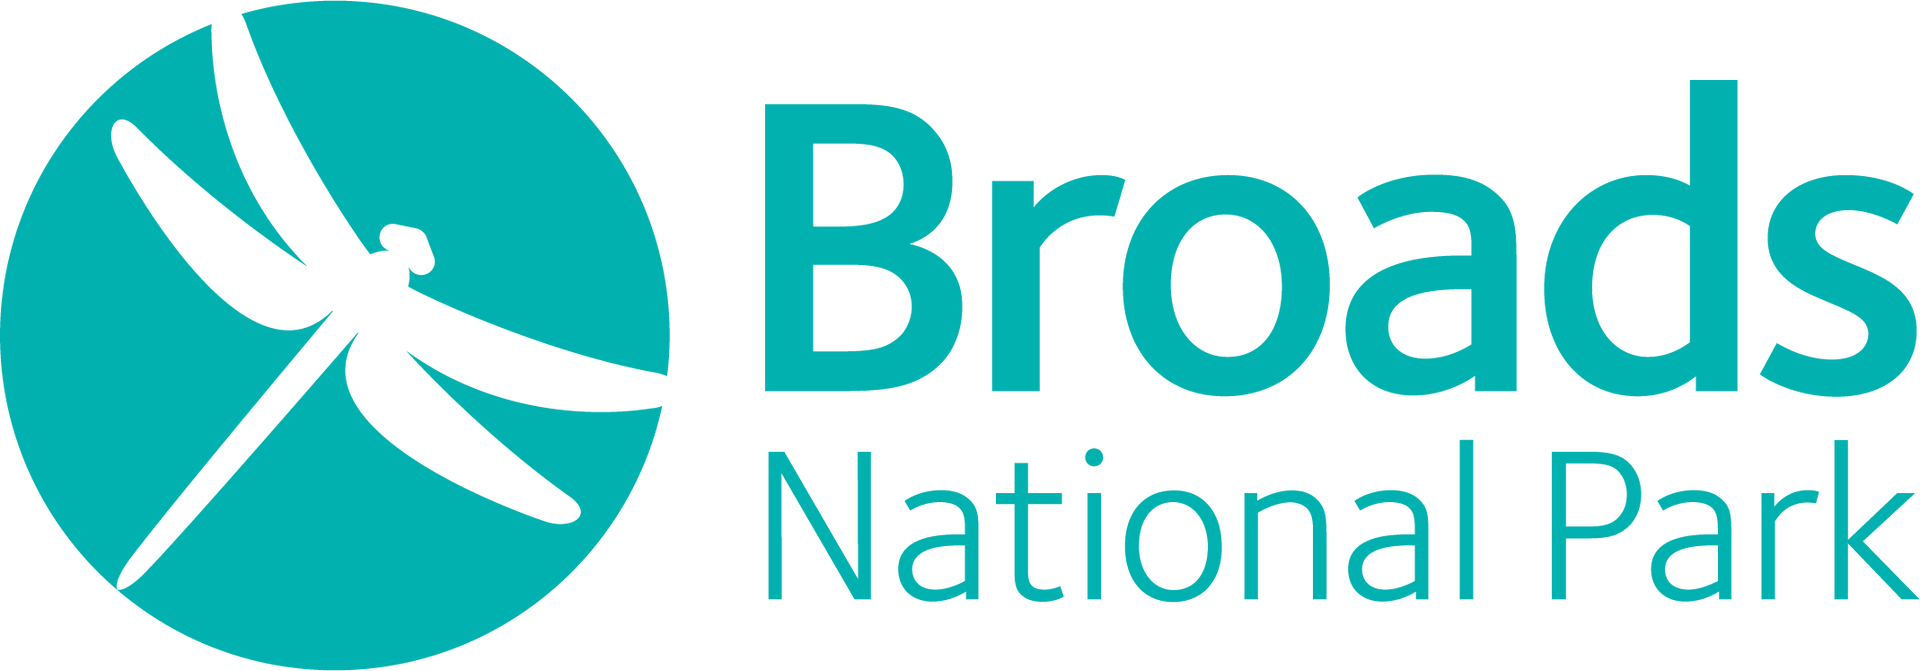 A logo for broads national park with a dragonfly on it